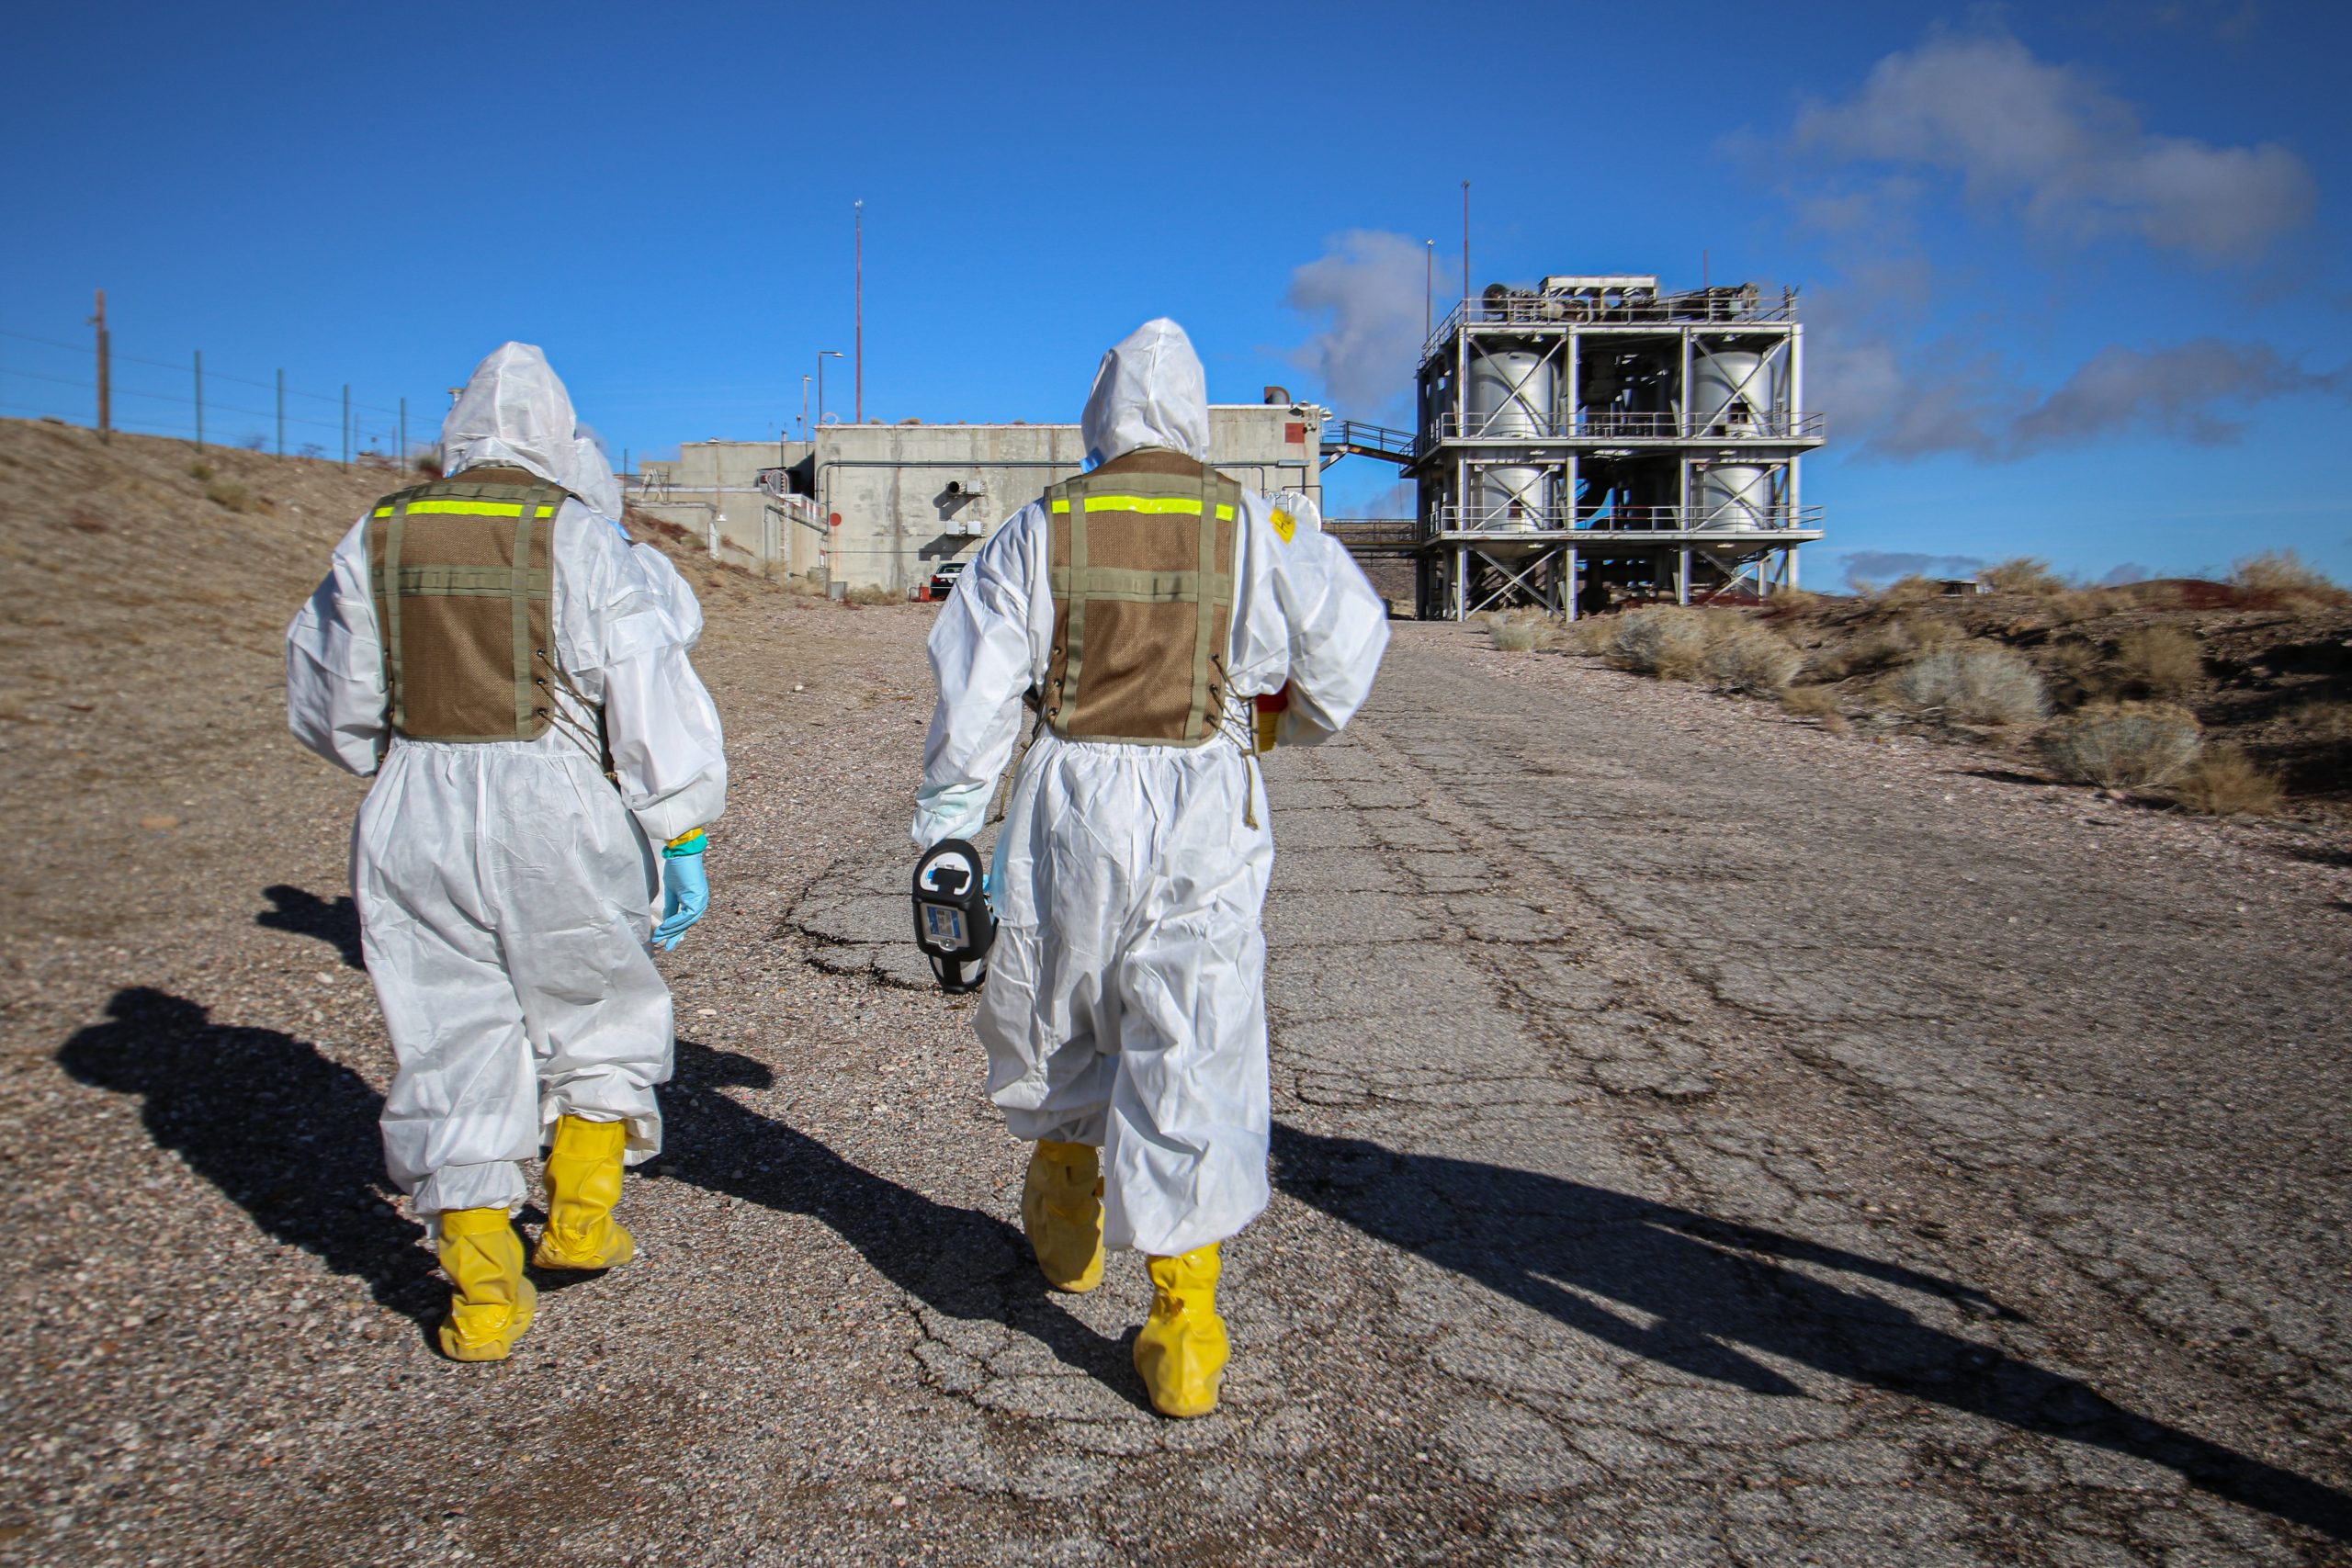 Two trainees in personal protective equipment train approach a building structure.